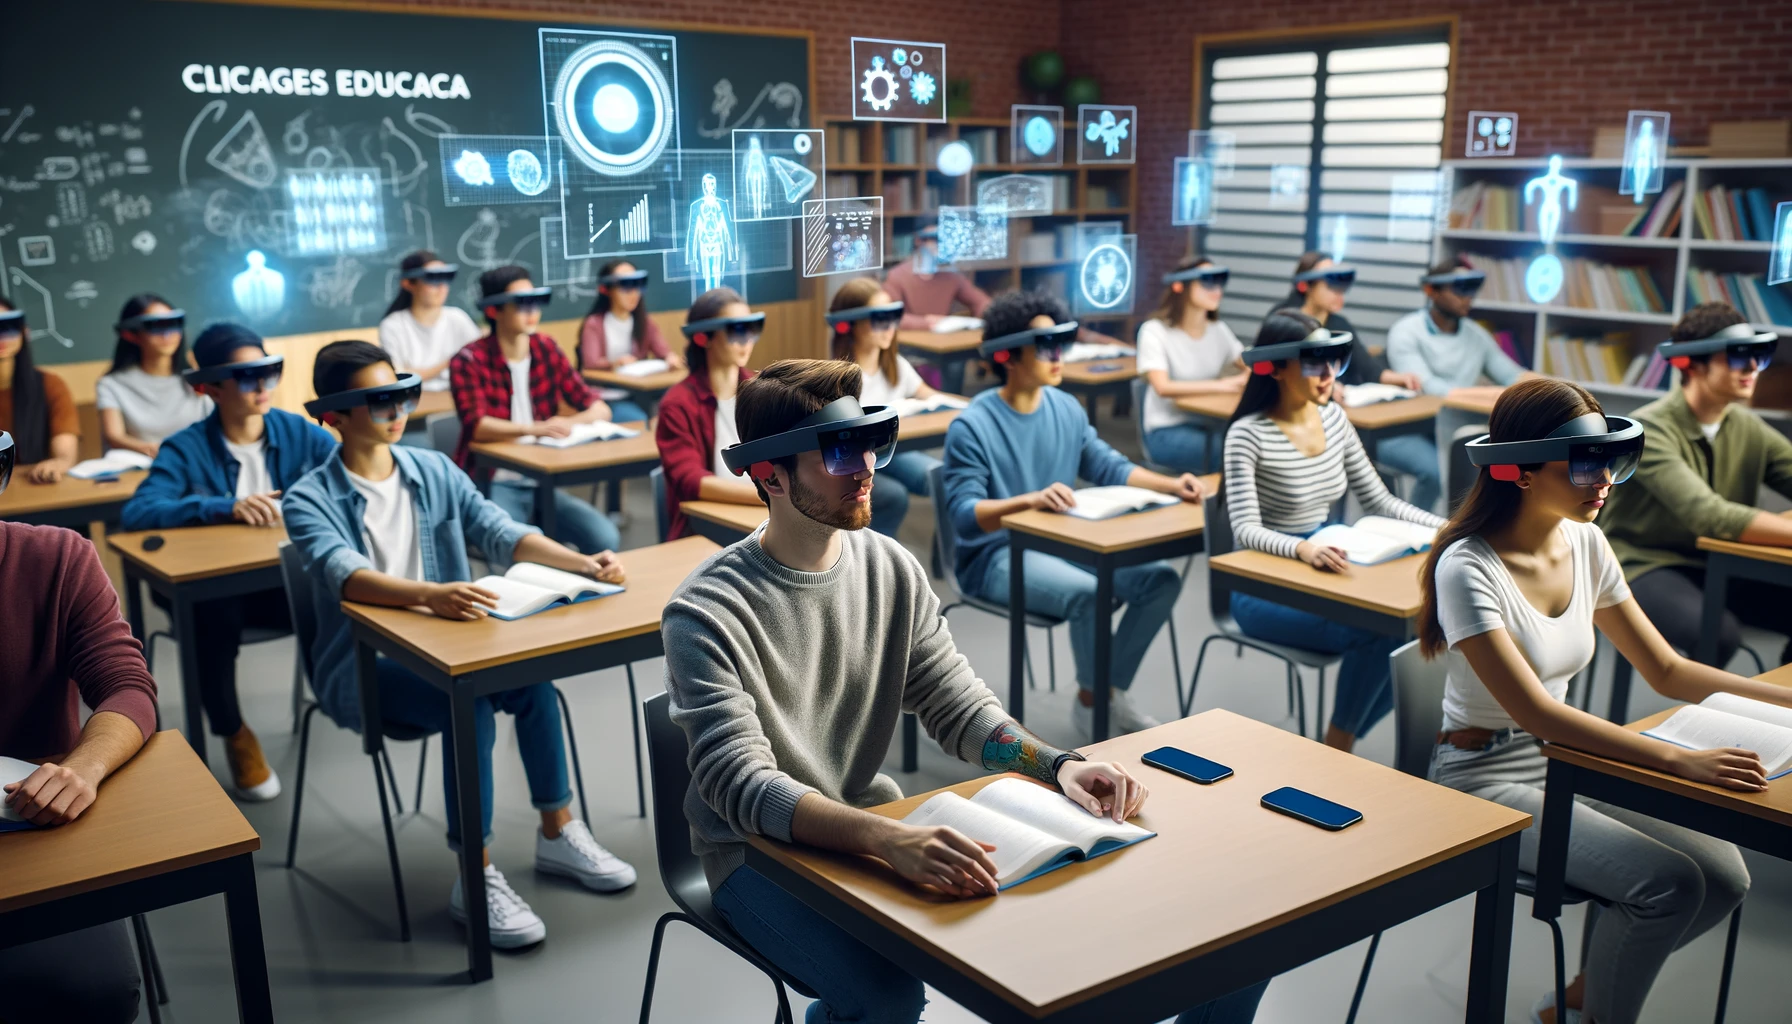 Students using Hololens 2 Mixed Reality glasses in class